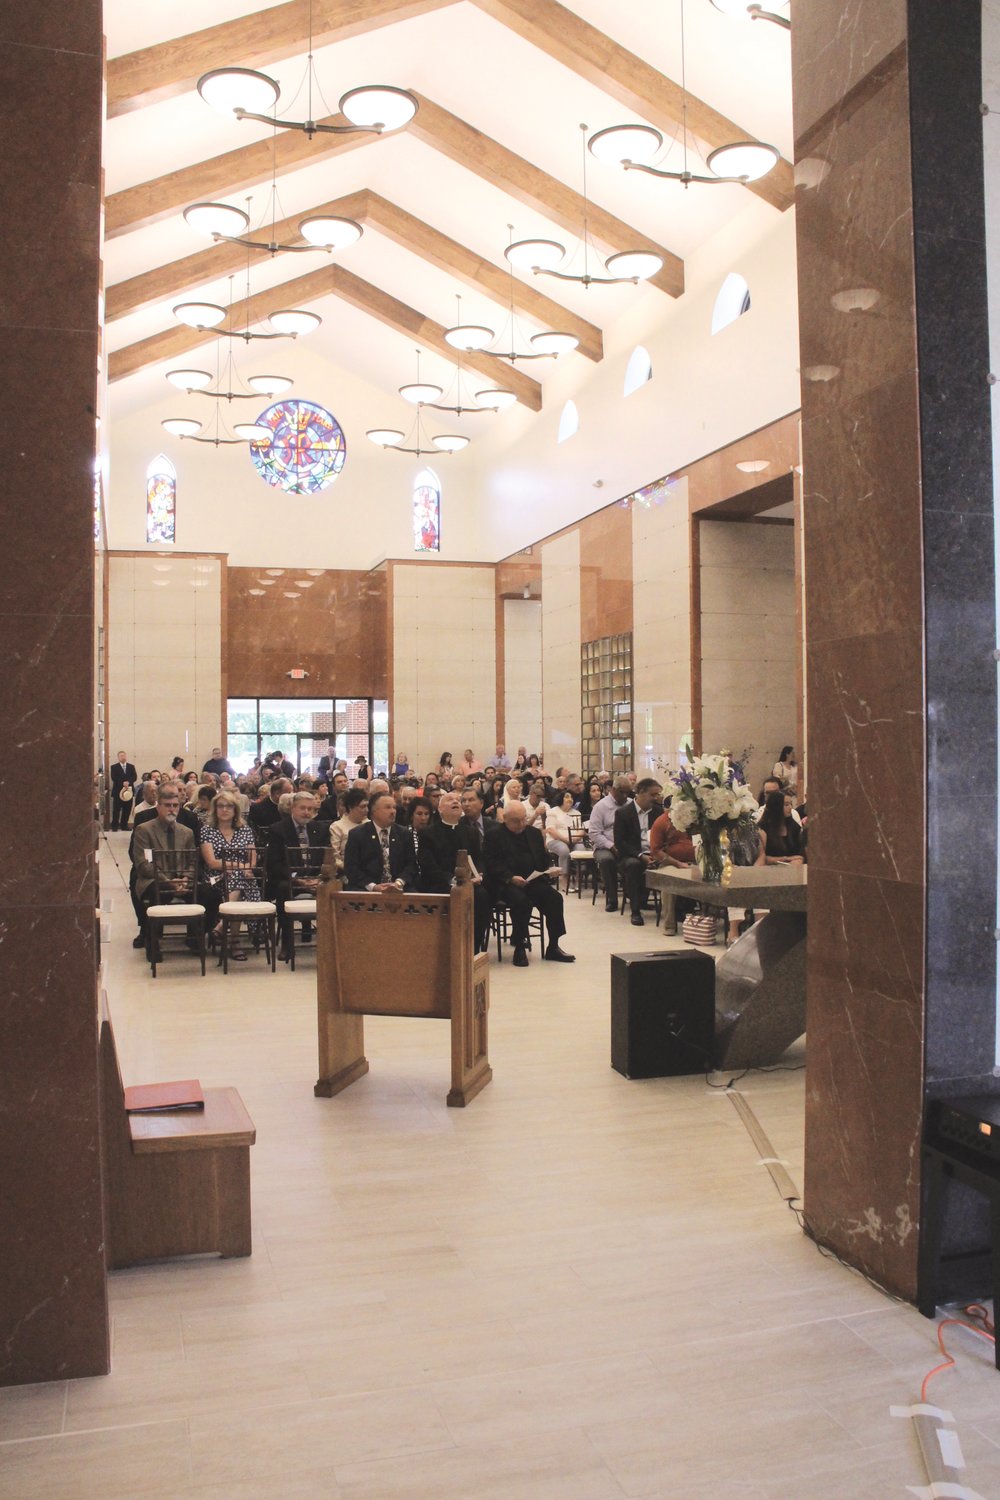 A FULL CHAPEL: More than 150 people gathered in the mausoleum chapel for dedication ceremonies.